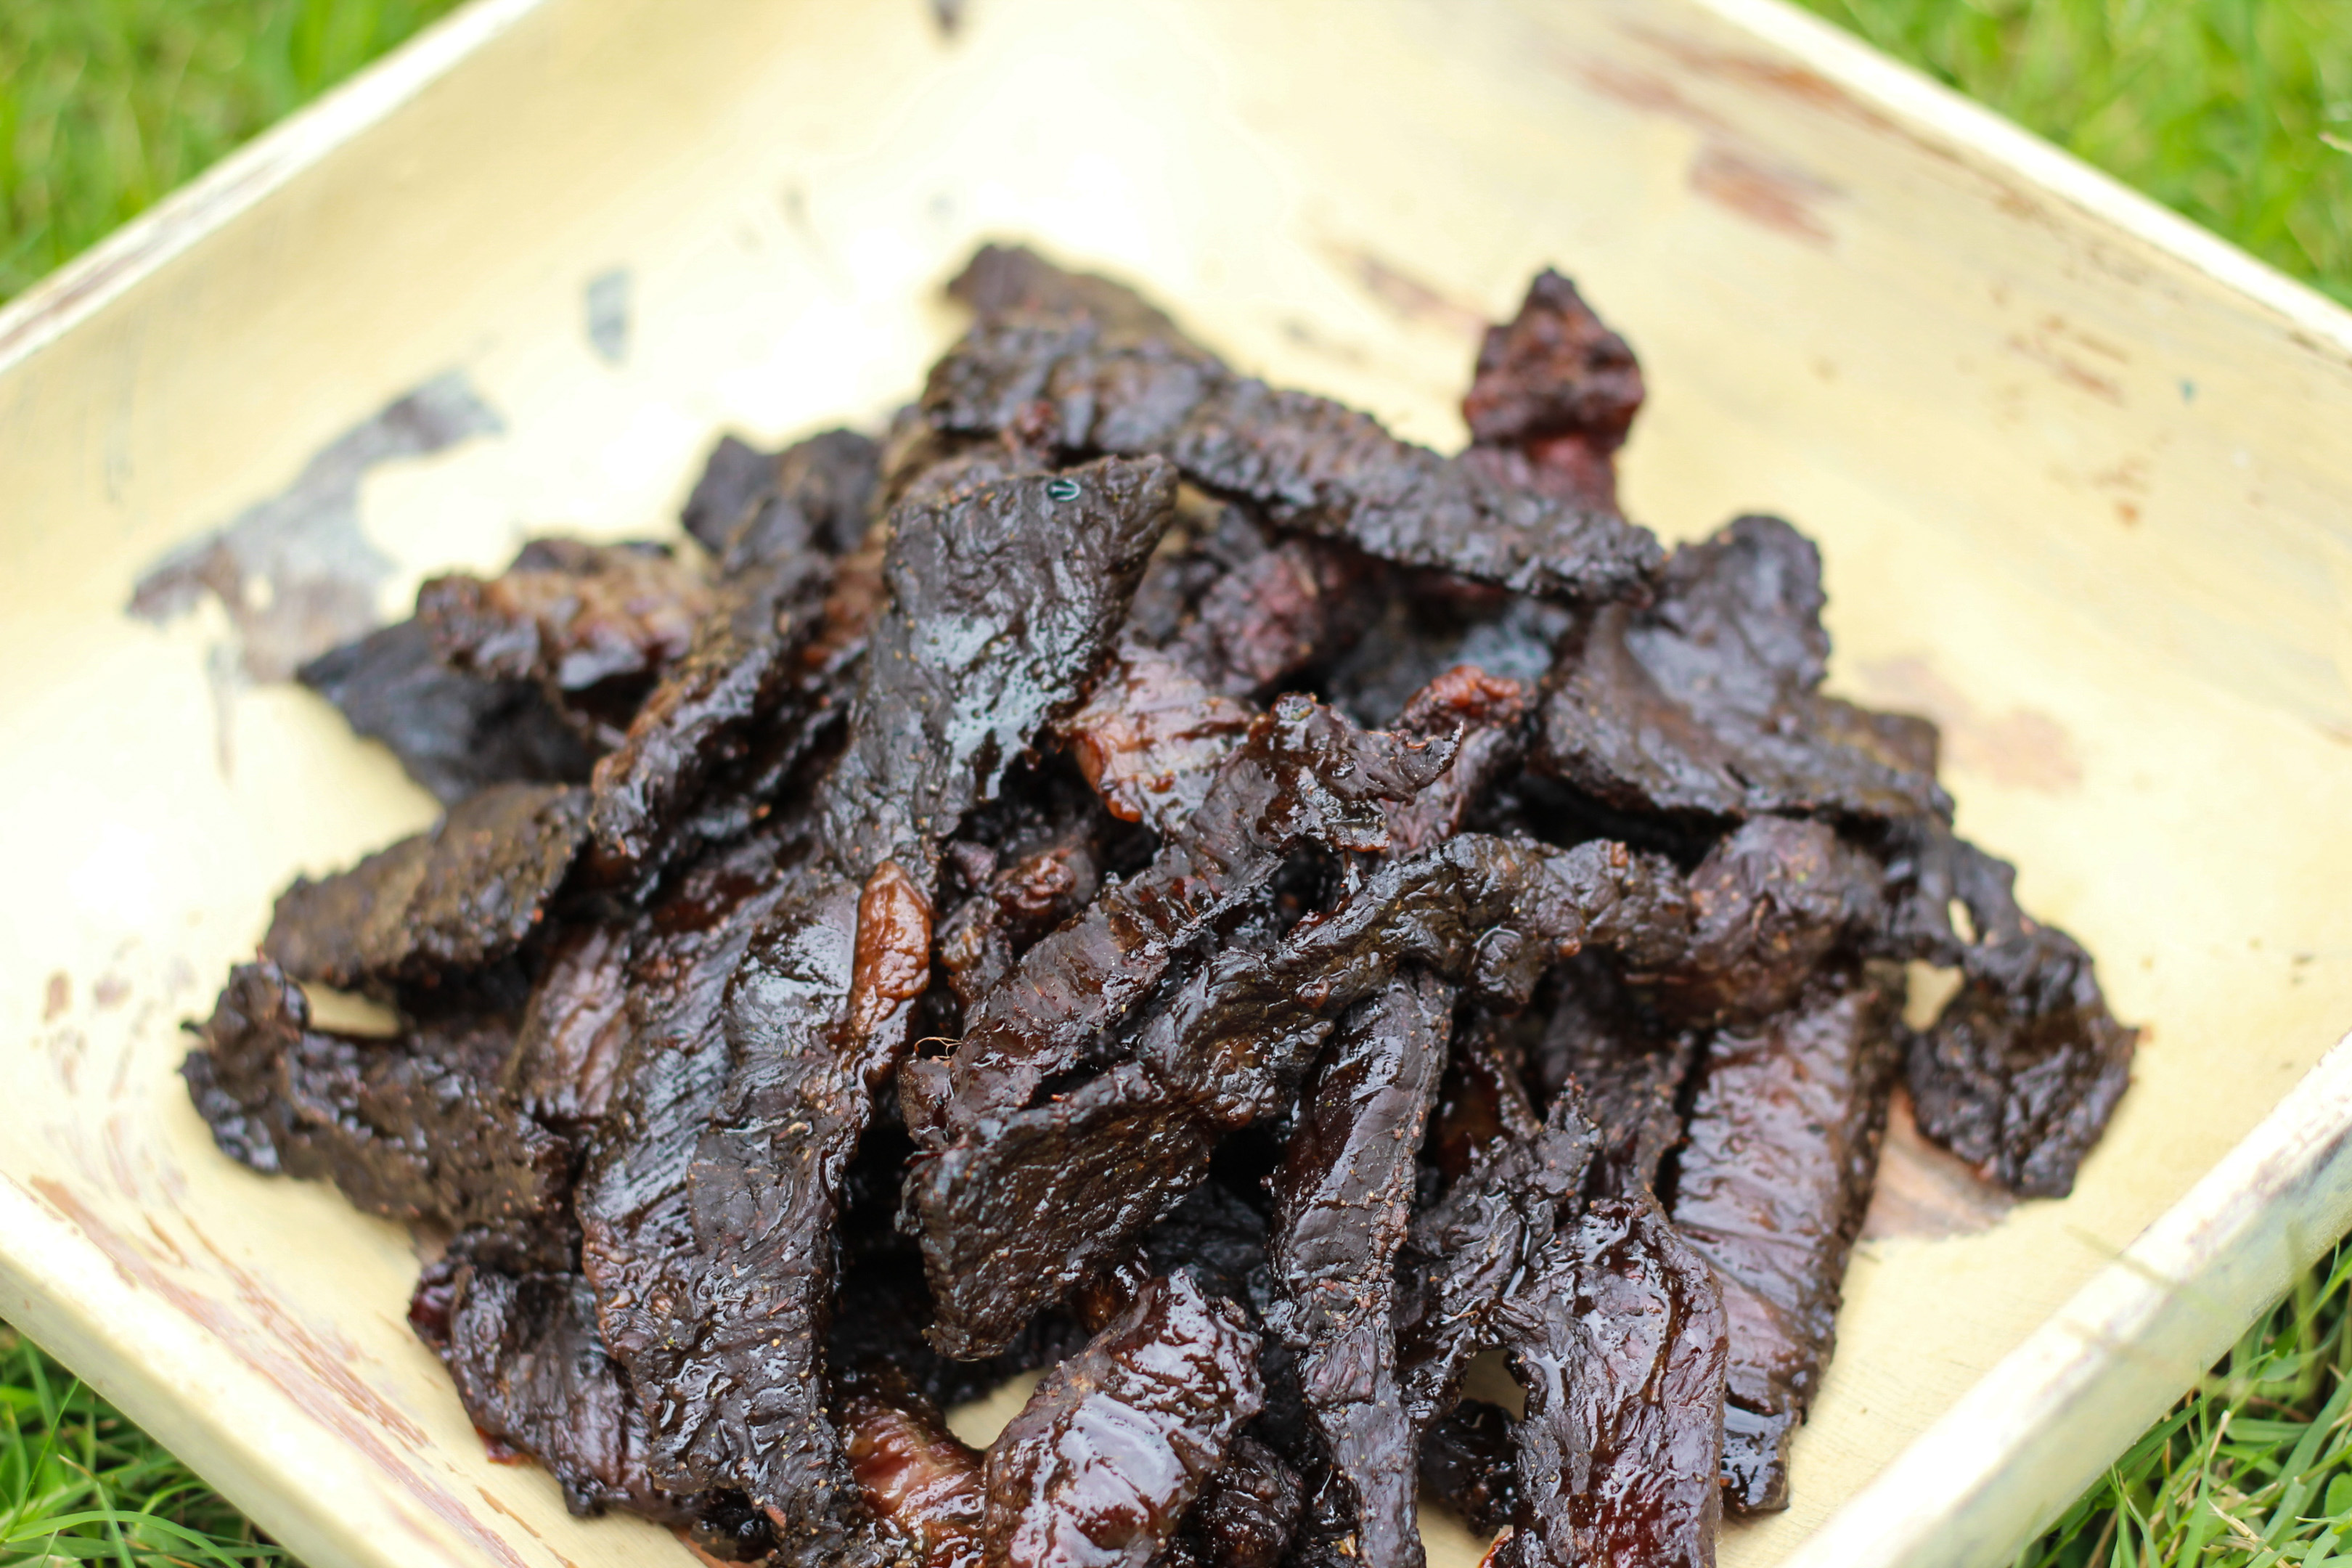 How to Make Beef Jerky Without a Dehydrator